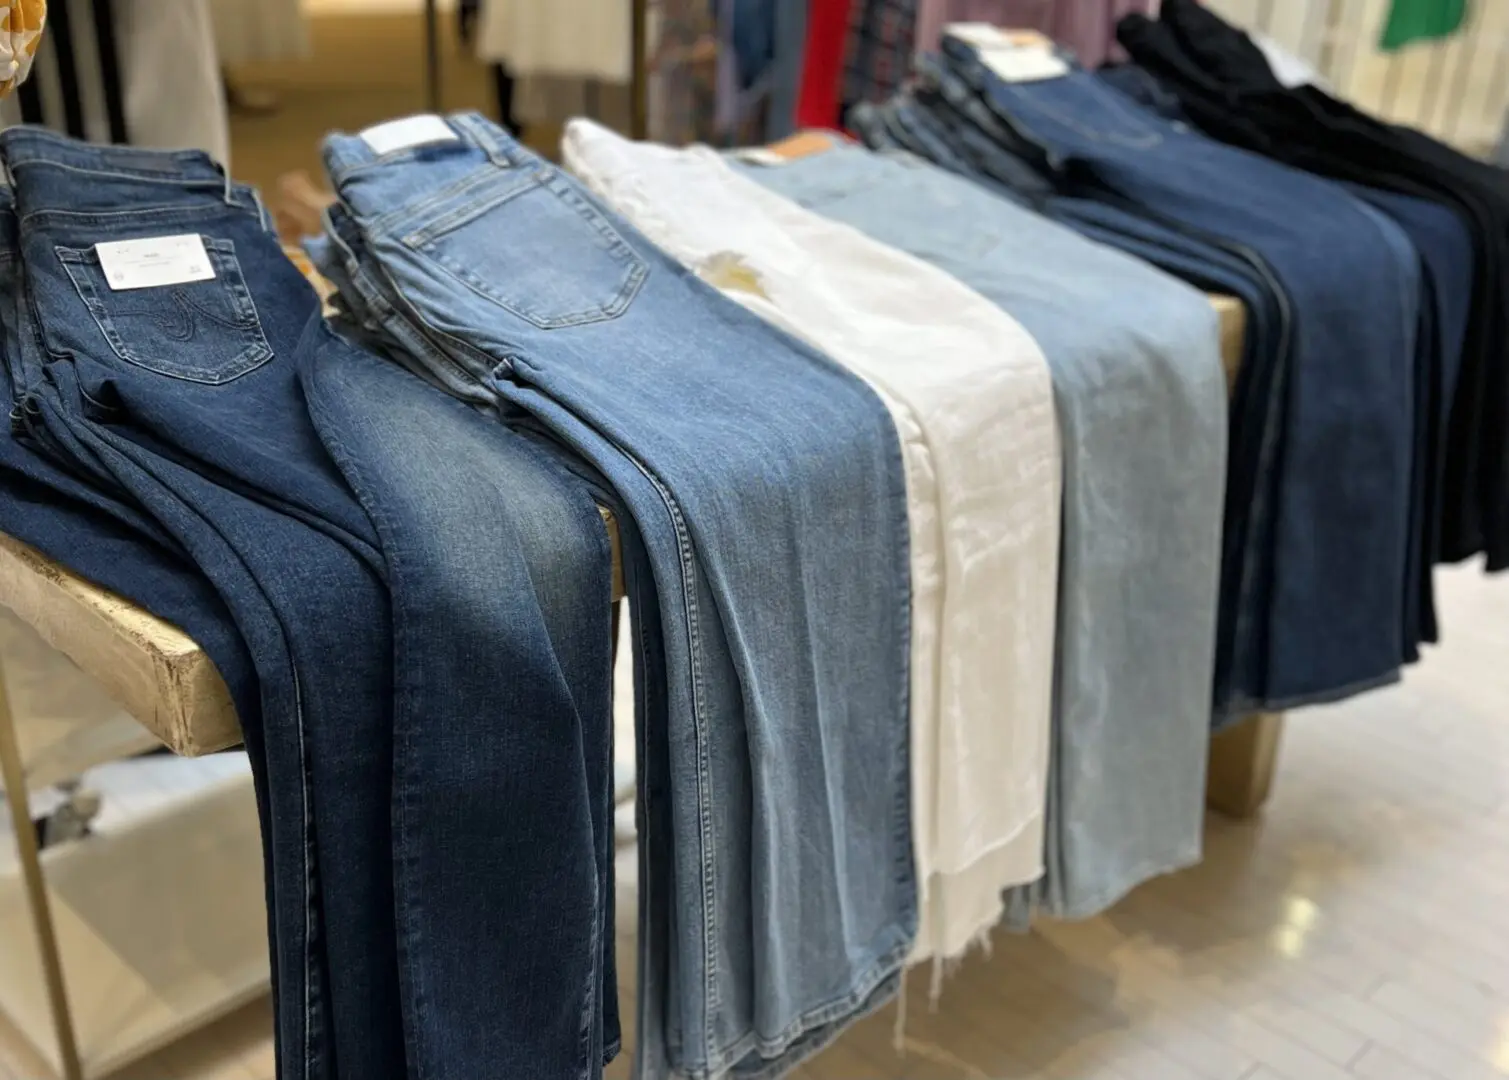 A display of pairs of jeans in various colors and styles